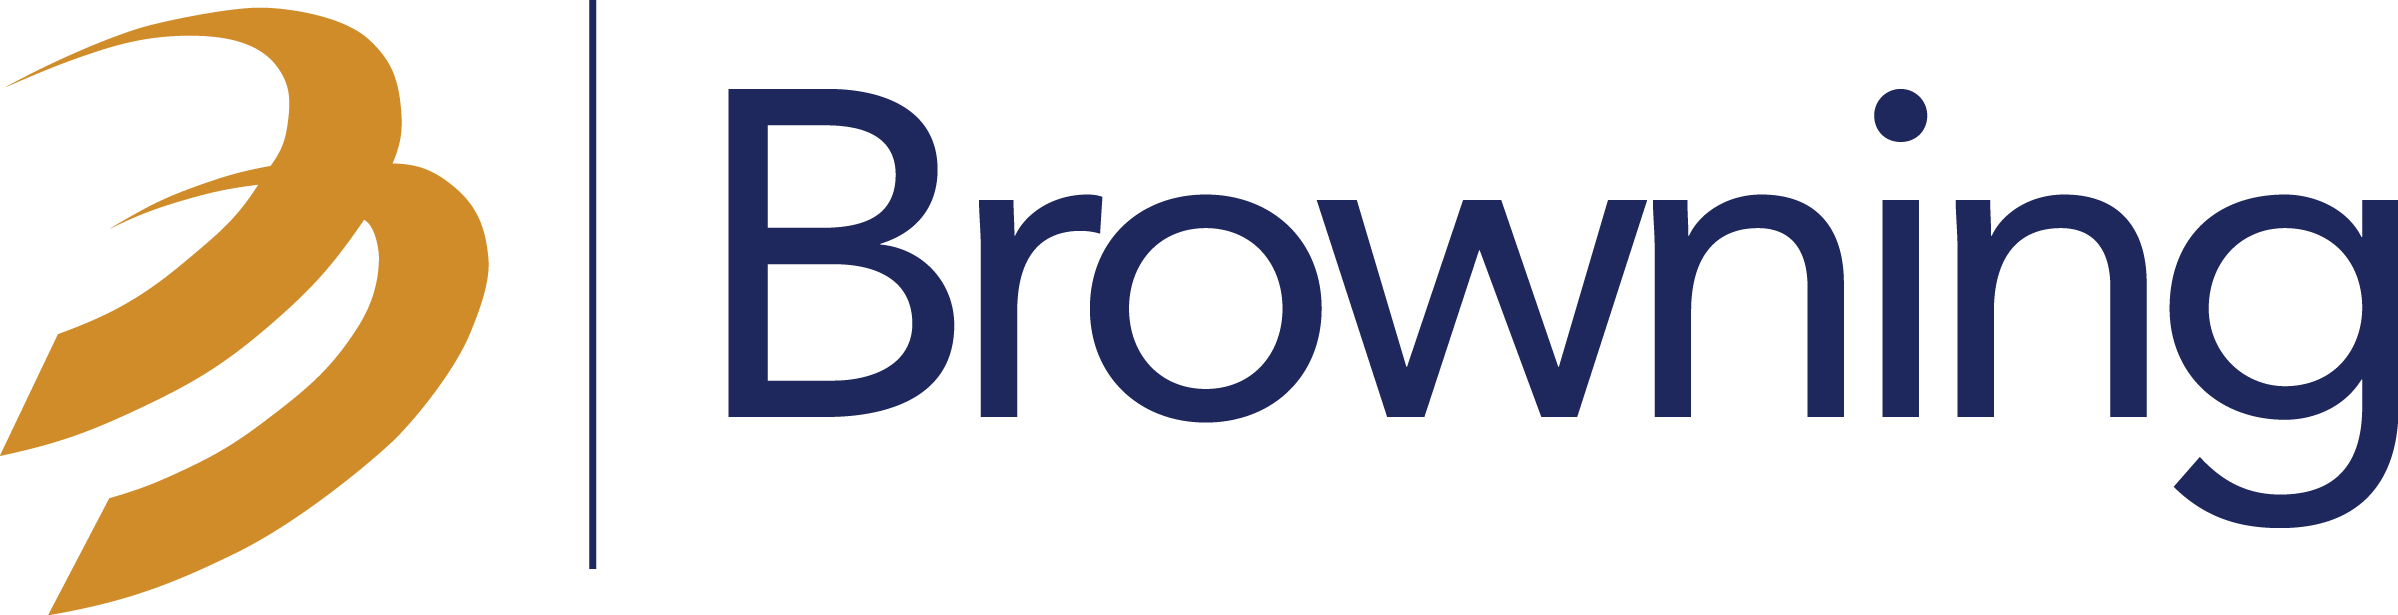 Browninglogo 2c Cmyk - Browning Investments (2398x615), Png Download